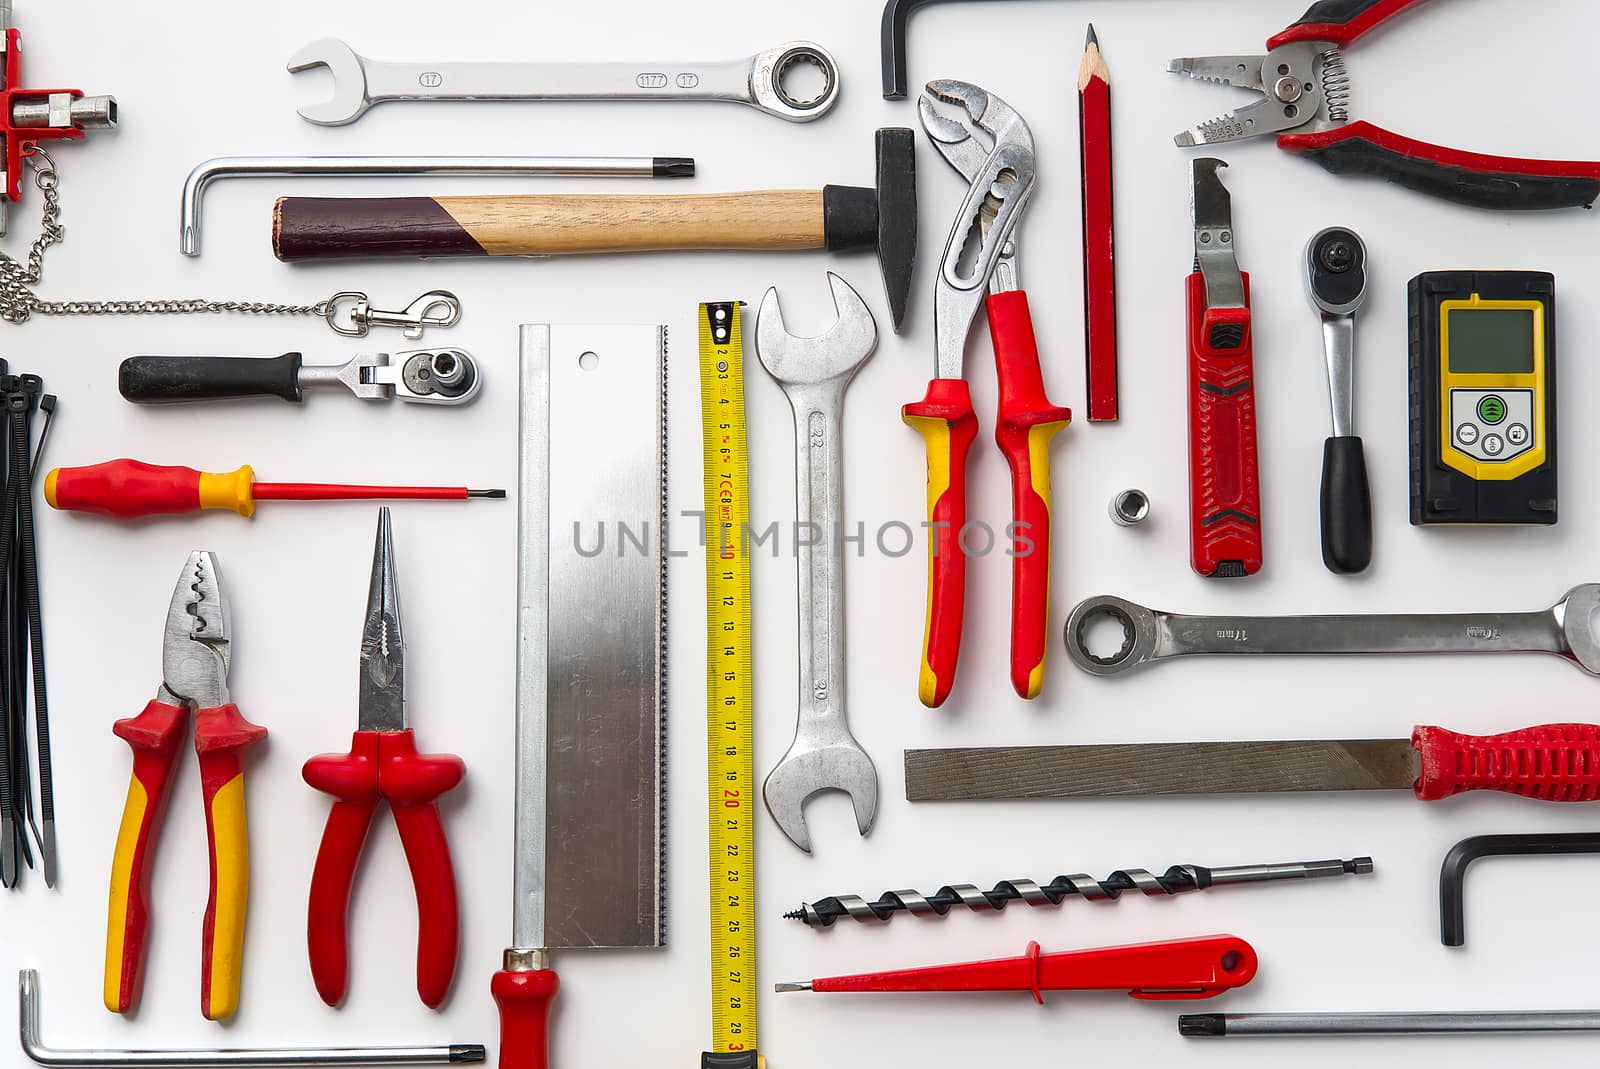 Home maintenance, service, diy concept. Tools for wood, metal and other construction work. Top view on DIY tools. home repairs. on white background